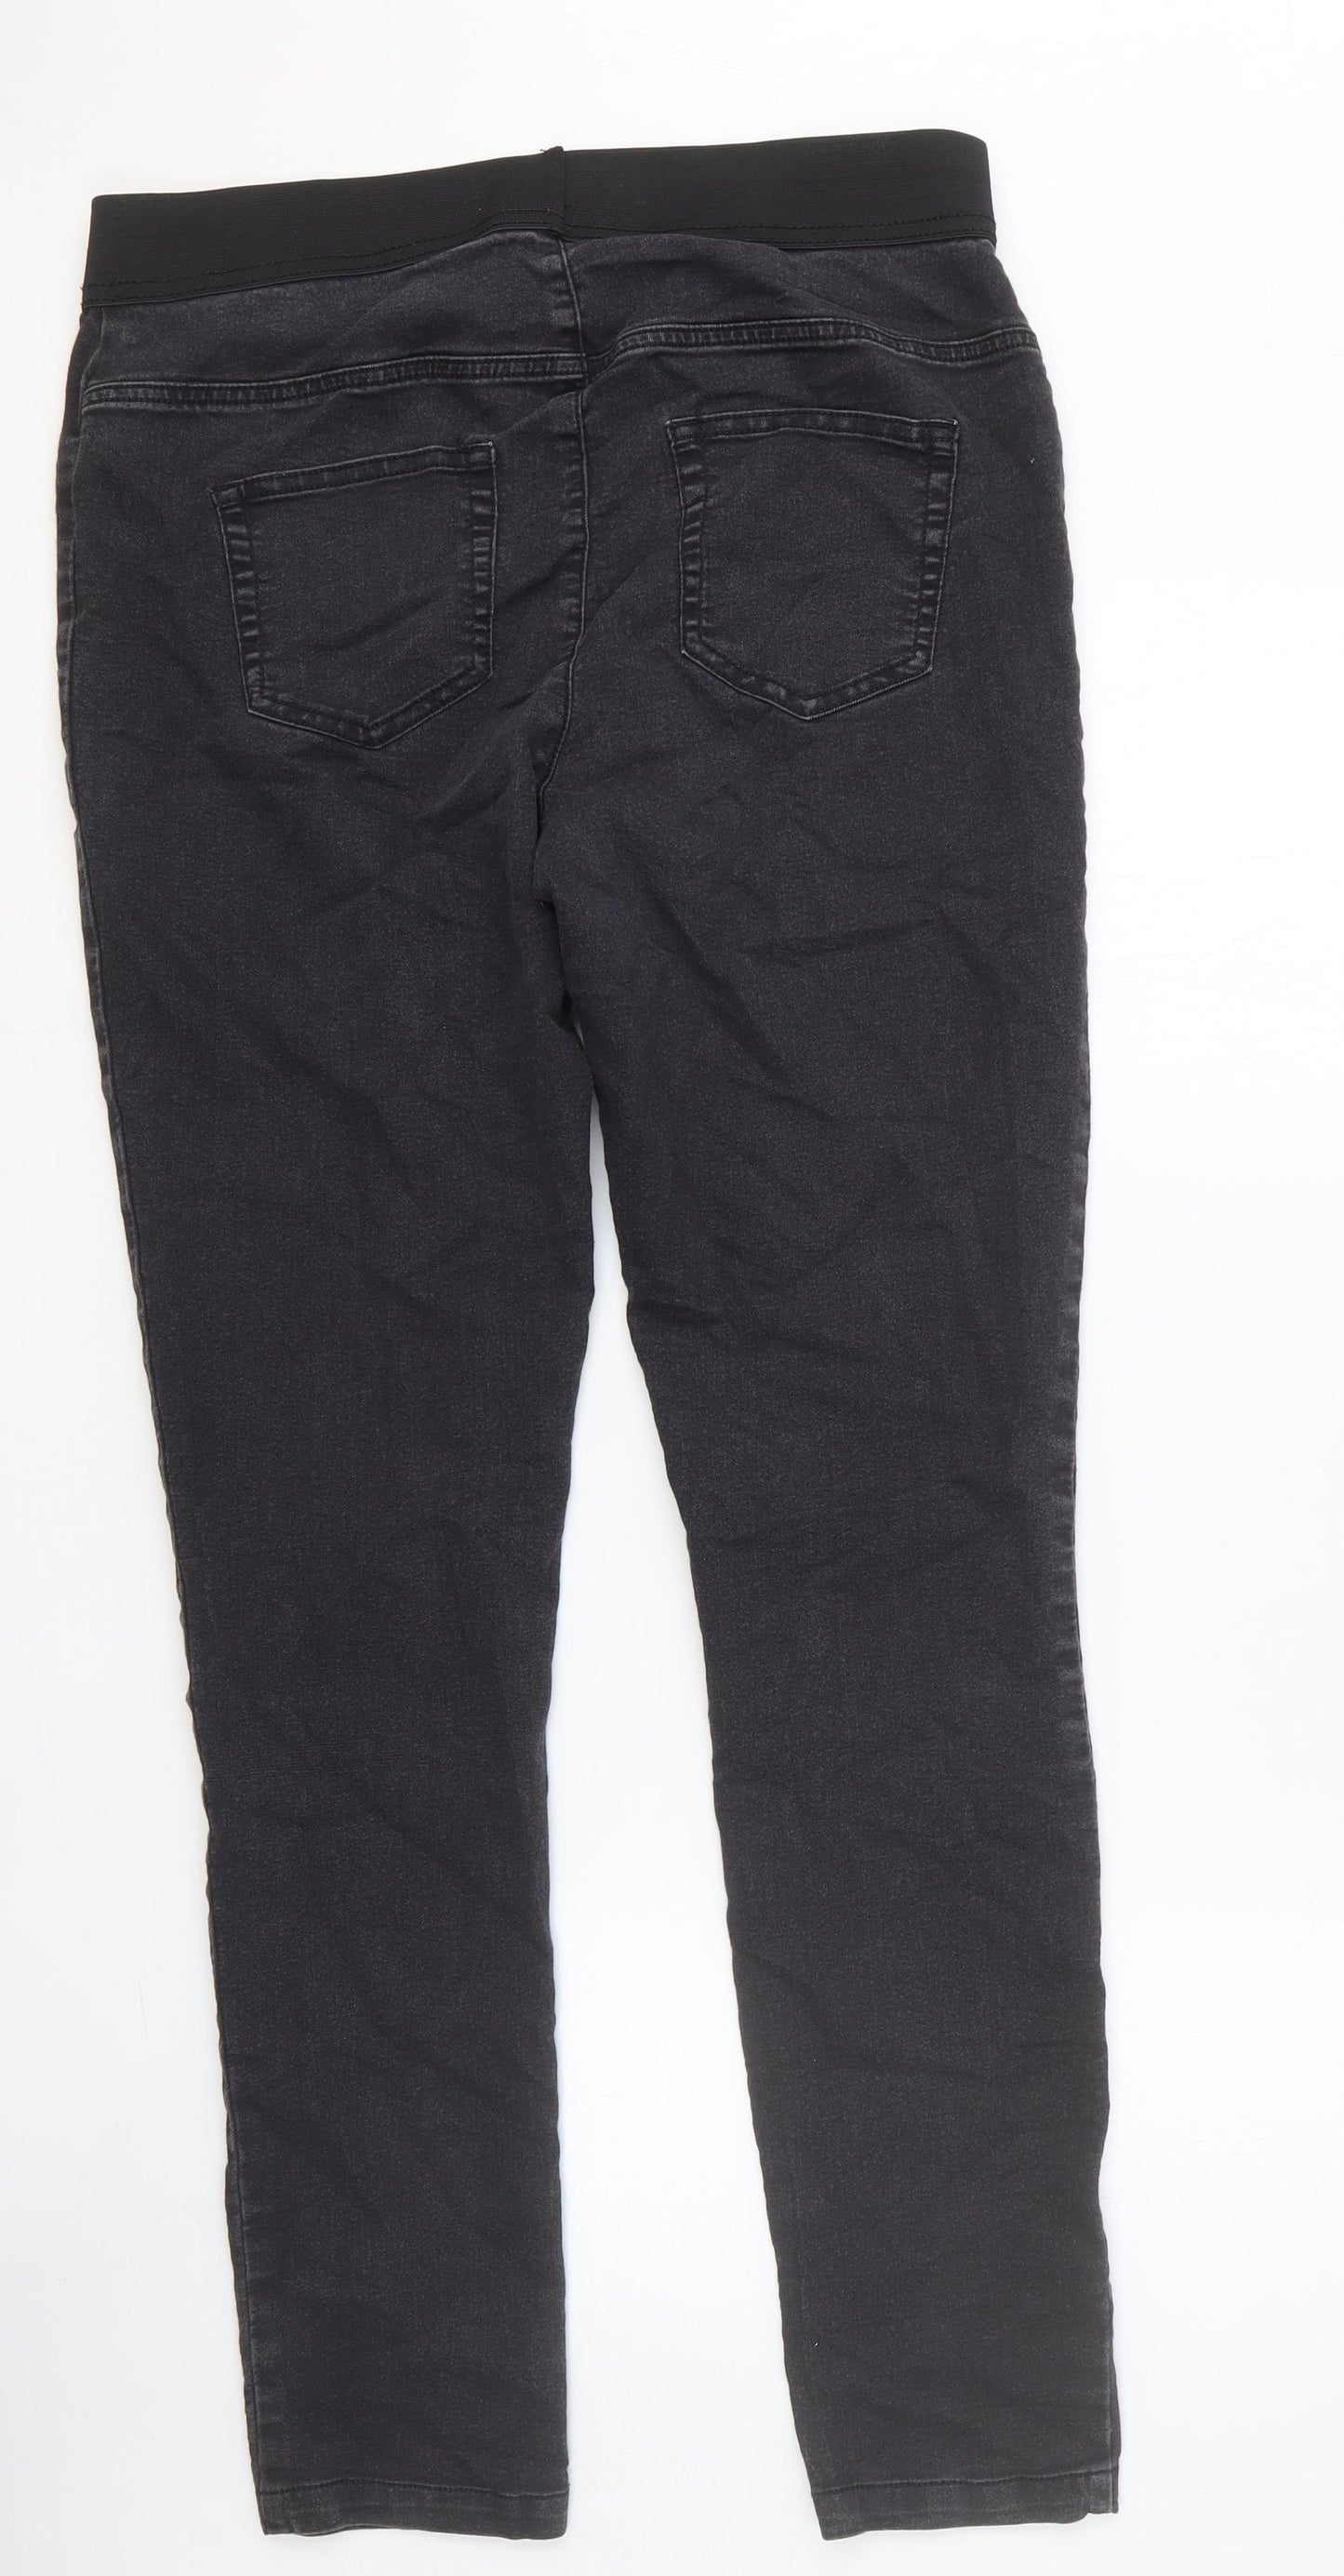 Marks and Spencer Womens Black Cotton Skinny Jeans Size 16 Regular